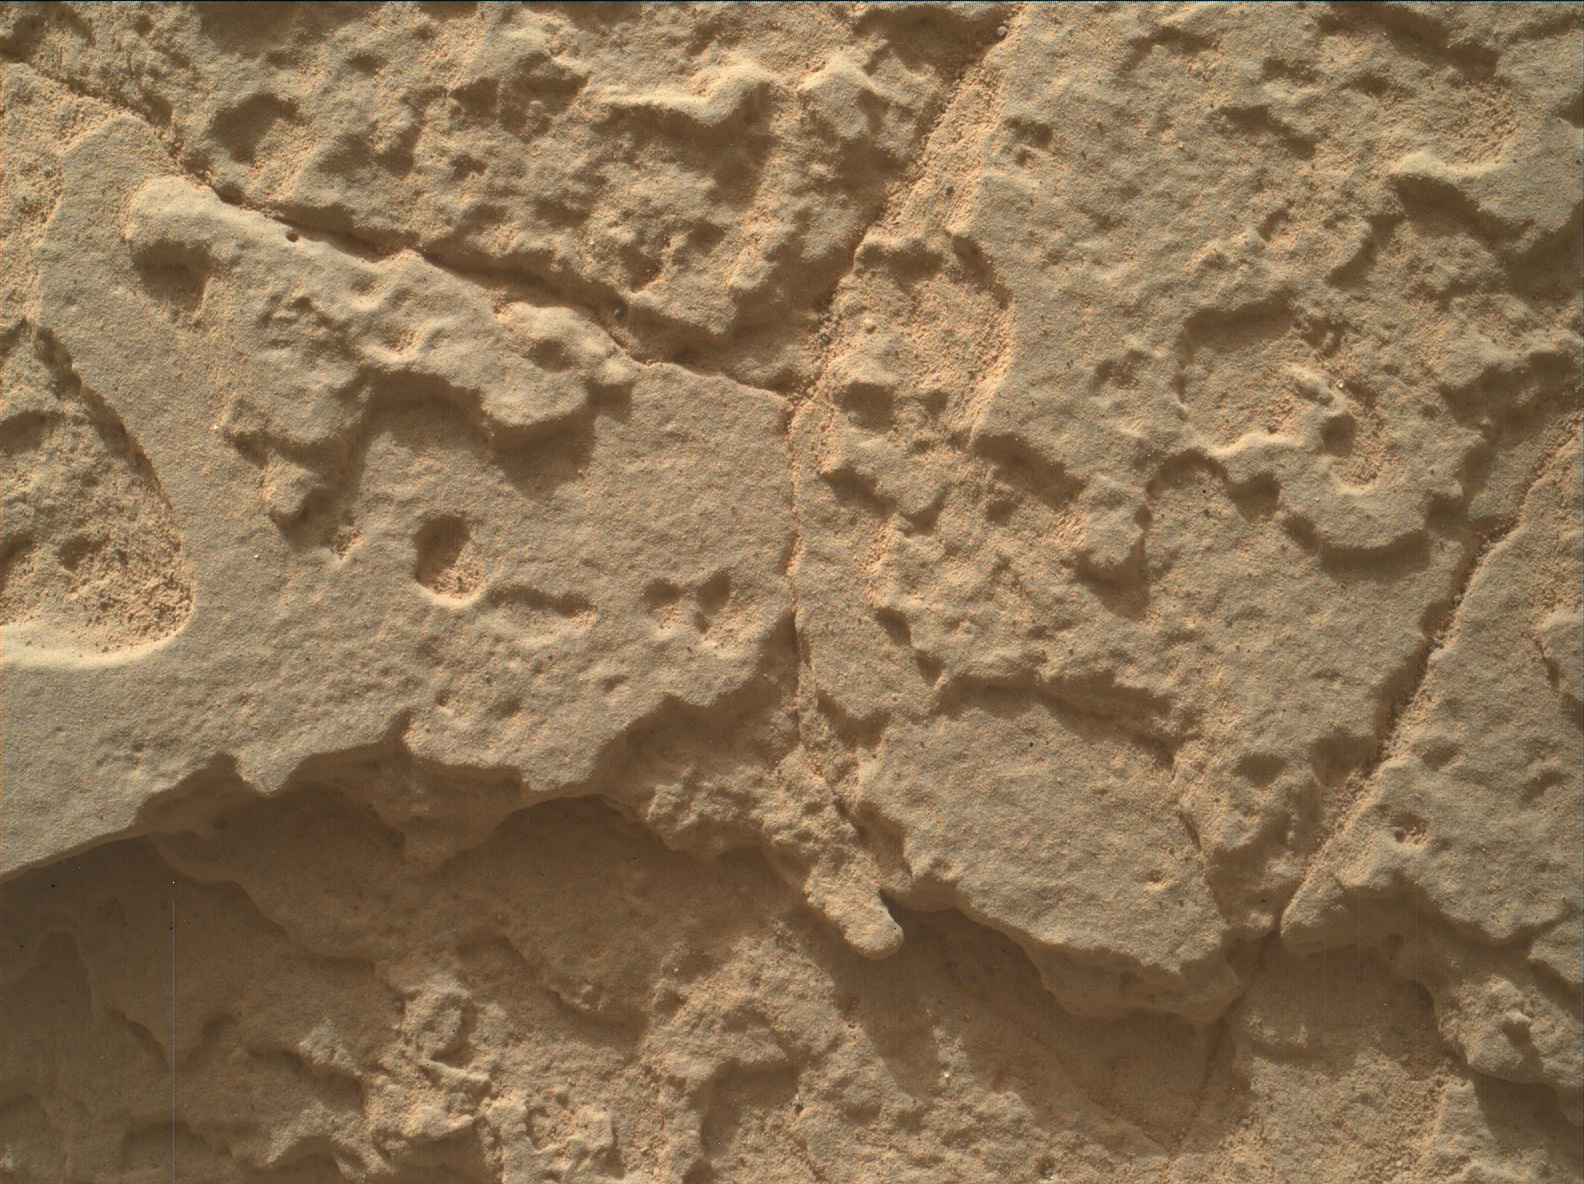 Nasa's Mars rover Curiosity acquired this image using its Mars Hand Lens Imager (MAHLI) on Sol 3393